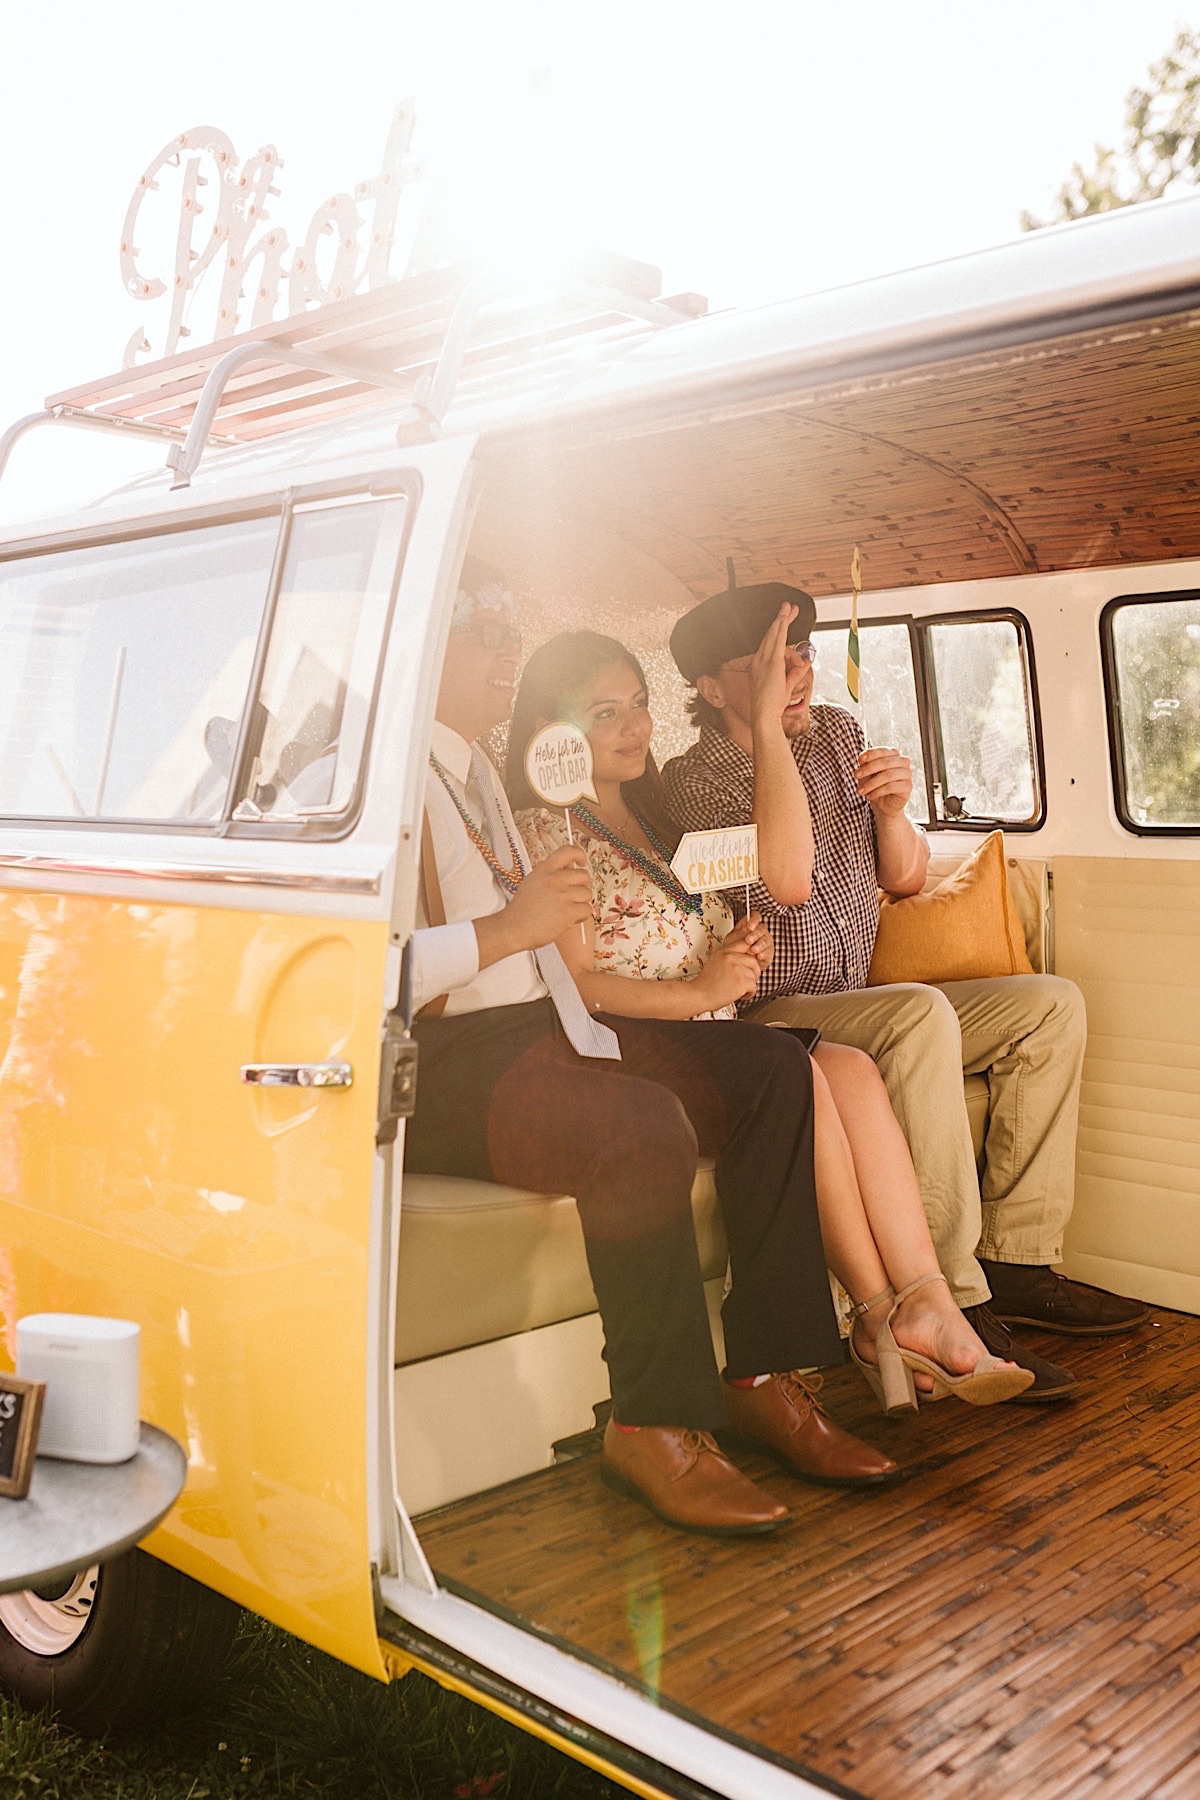 Three people sit in the back seat of a Volkswagon van-turned-photo booth at a wedding at Creative Arts Guild in Dalton, GA